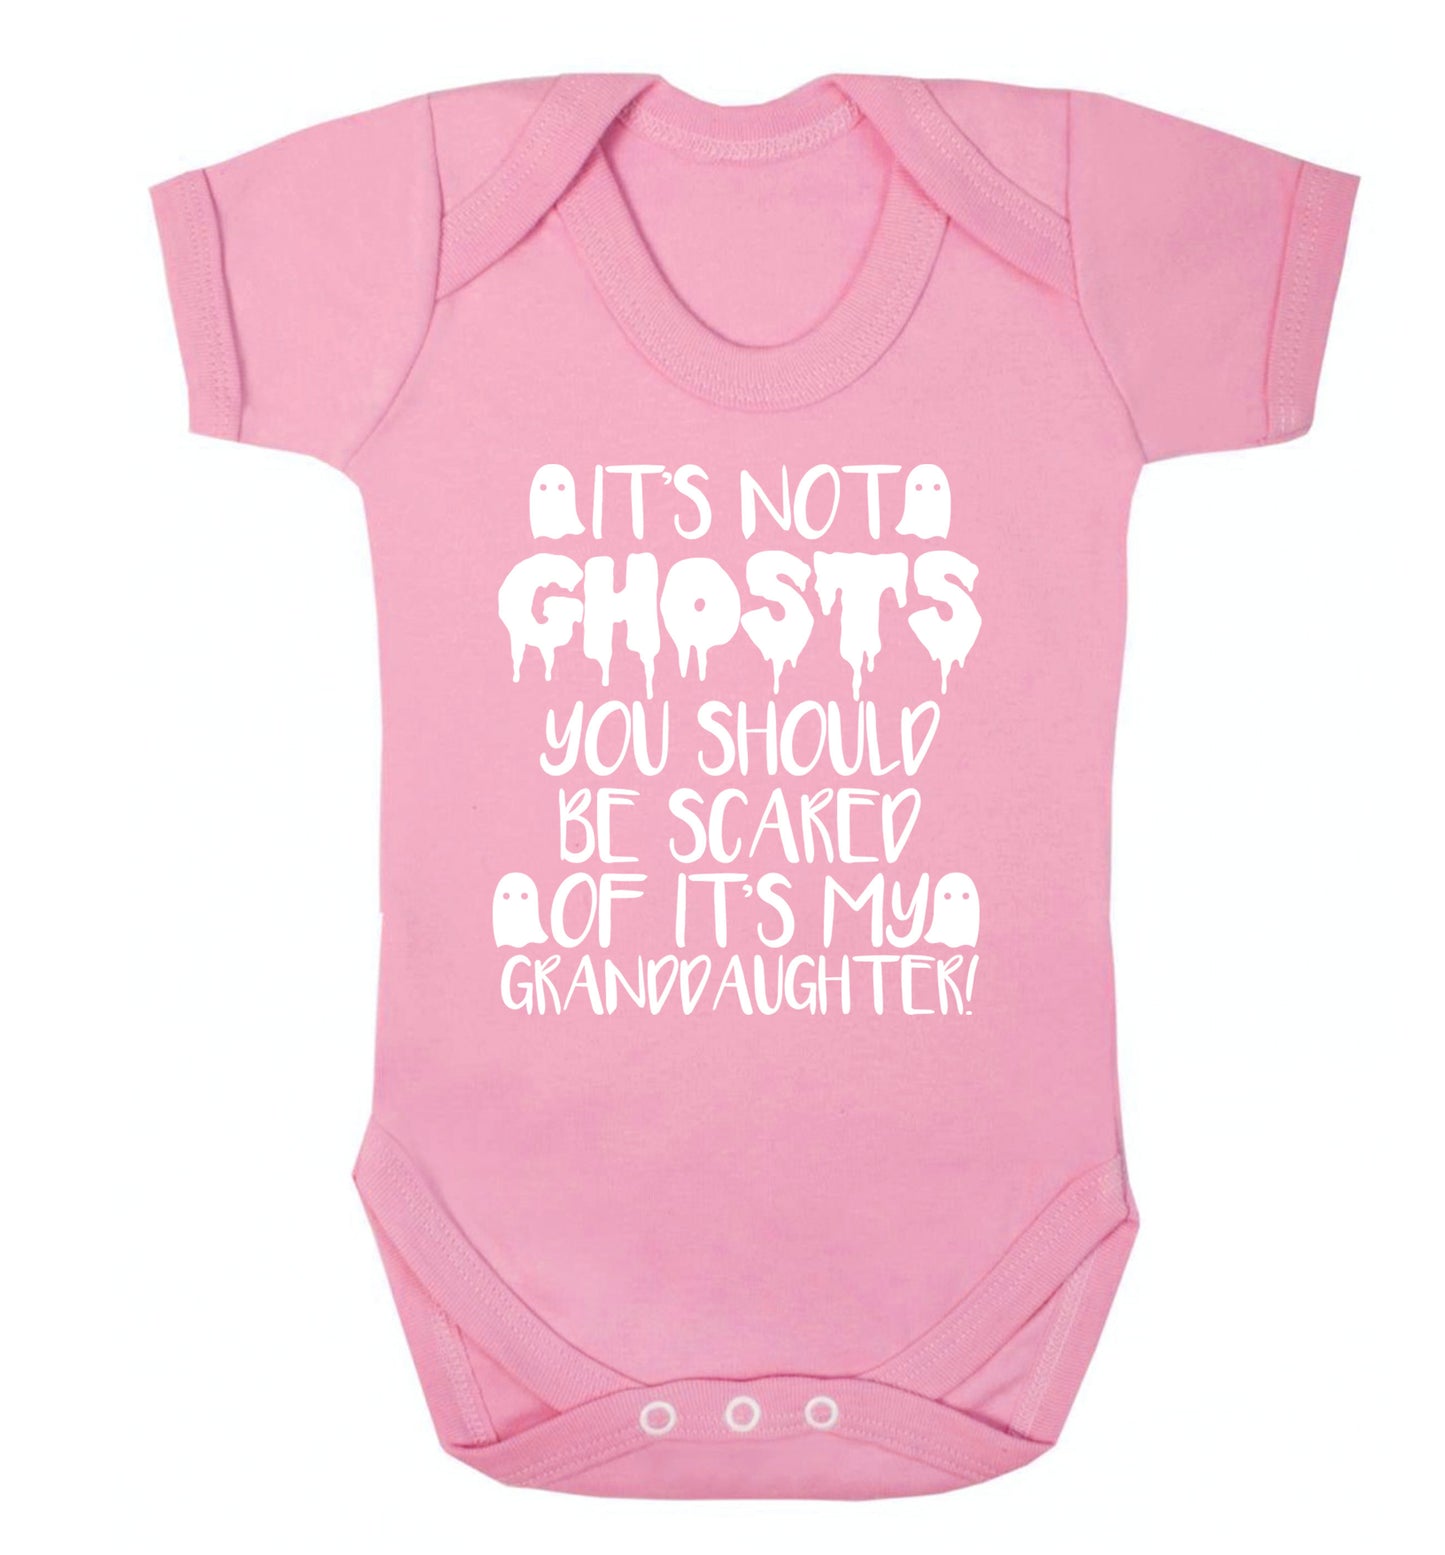 It's not ghosts you should be scared of it's my granddaughter! Baby Vest pale pink 18-24 months